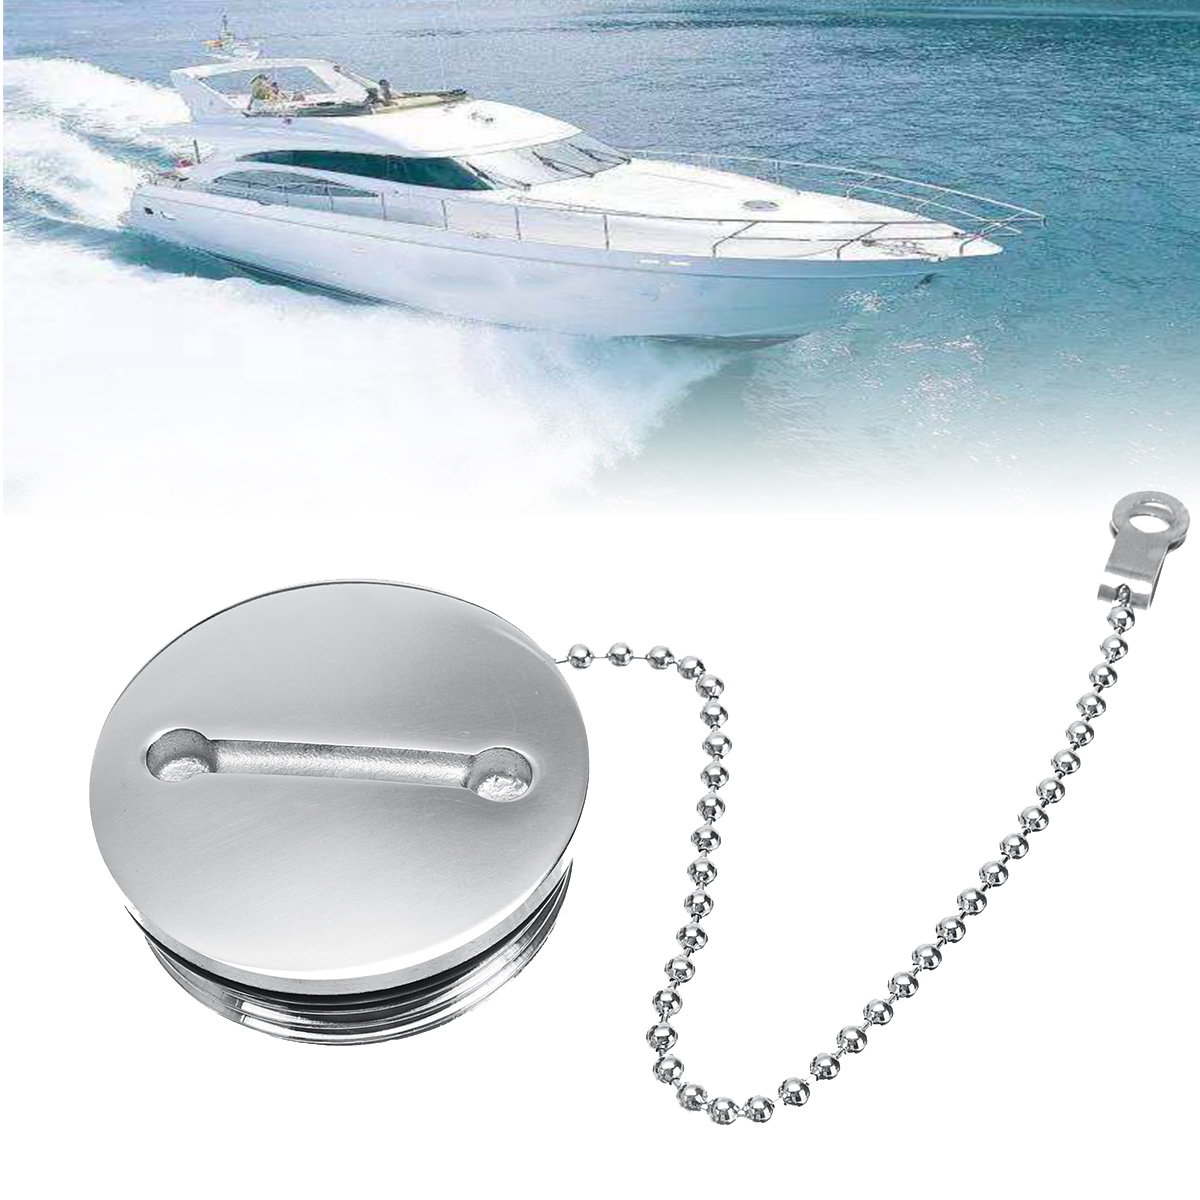 Boat-Deck-Fill-Oil-Filler-Replacement-Cap-with-Chain-Stainless-Steel-Fuel-Water-Gas-1336989